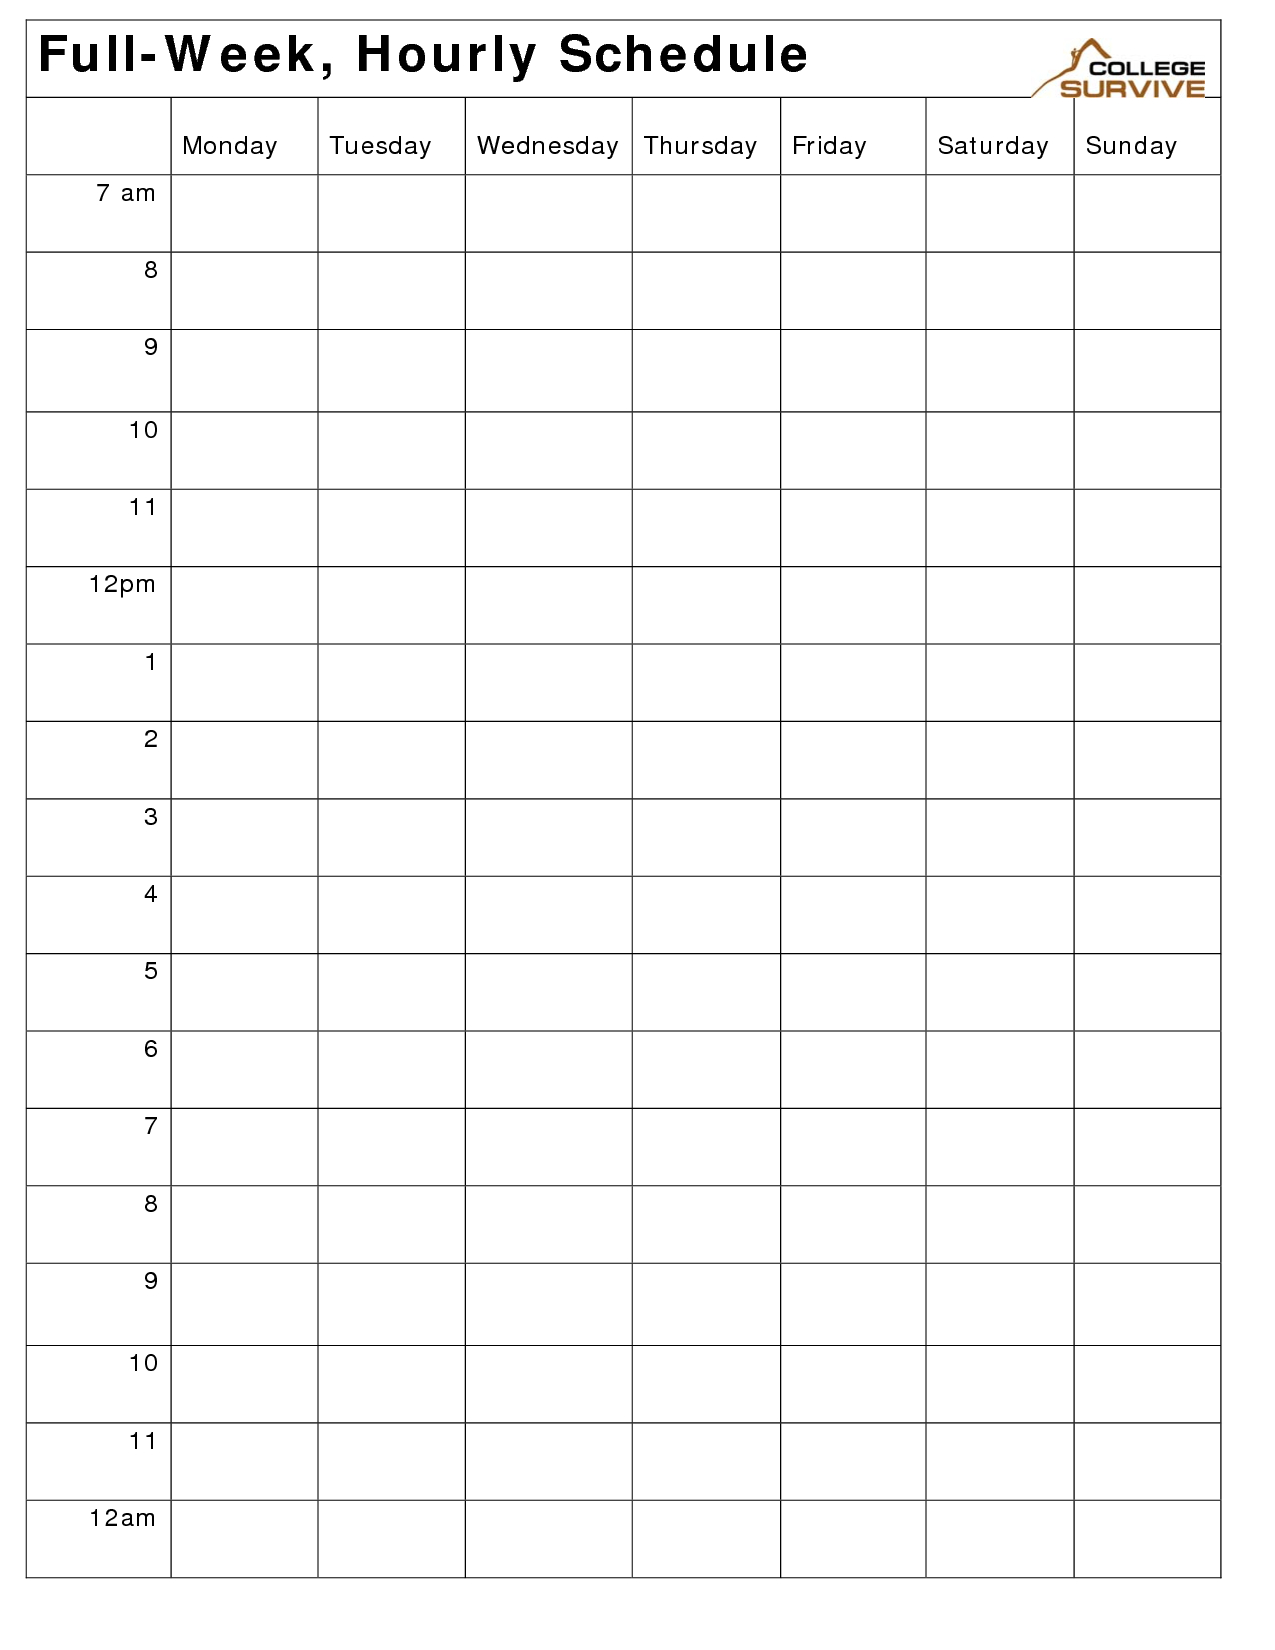 Printable Weekly Hourly Schedule Template … | Weekly Planner intended for Free Hourly Planner Template